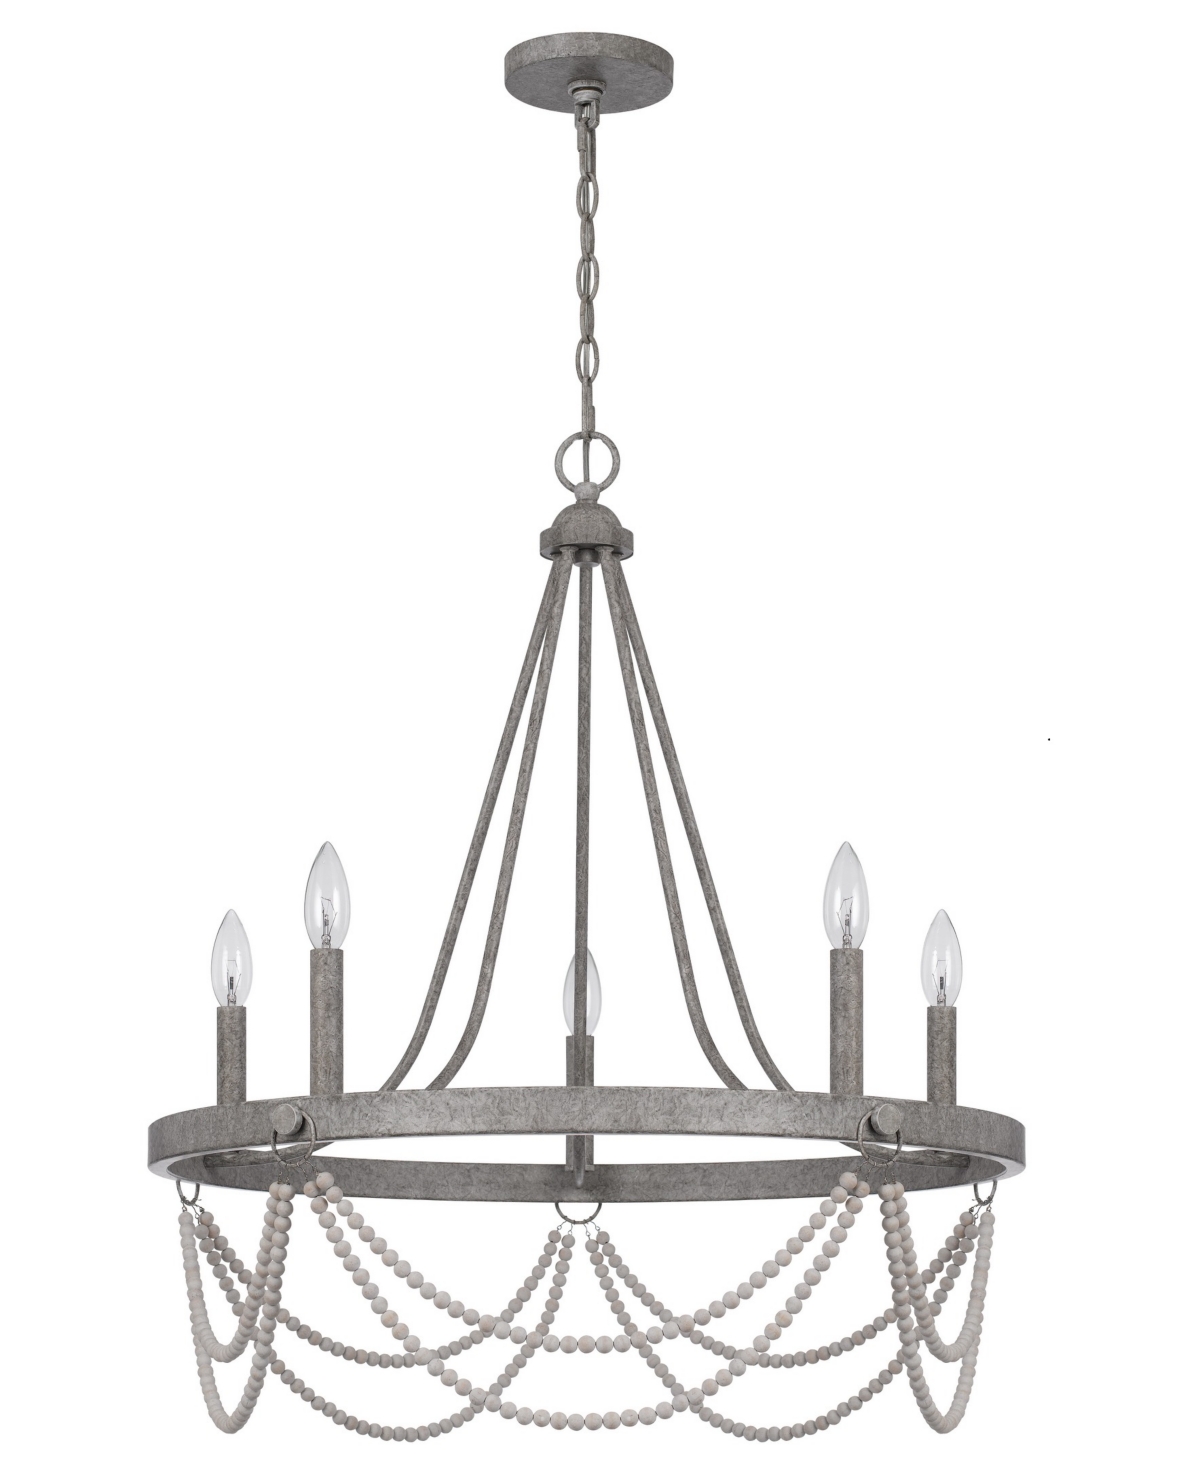 Cal Lighting Anniston 29" Height Metal Chandelier In Antique Silver